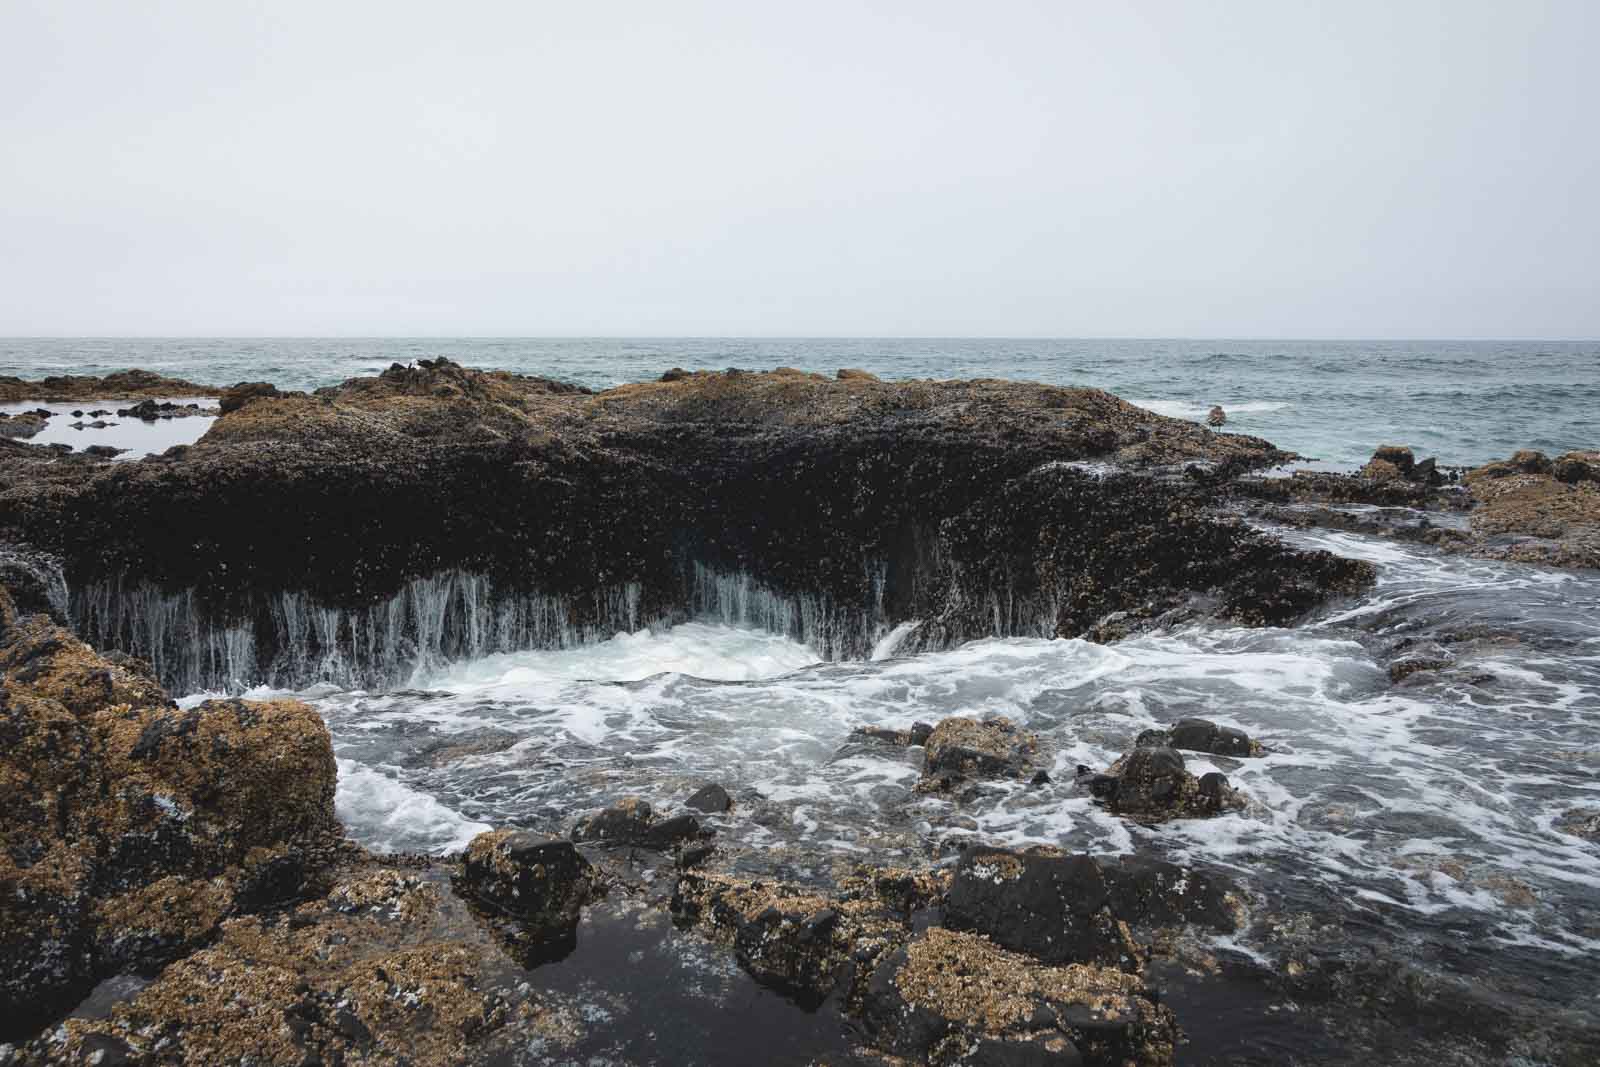 Close up shot of Thor's Well - a rocky cauldron in the ocean.